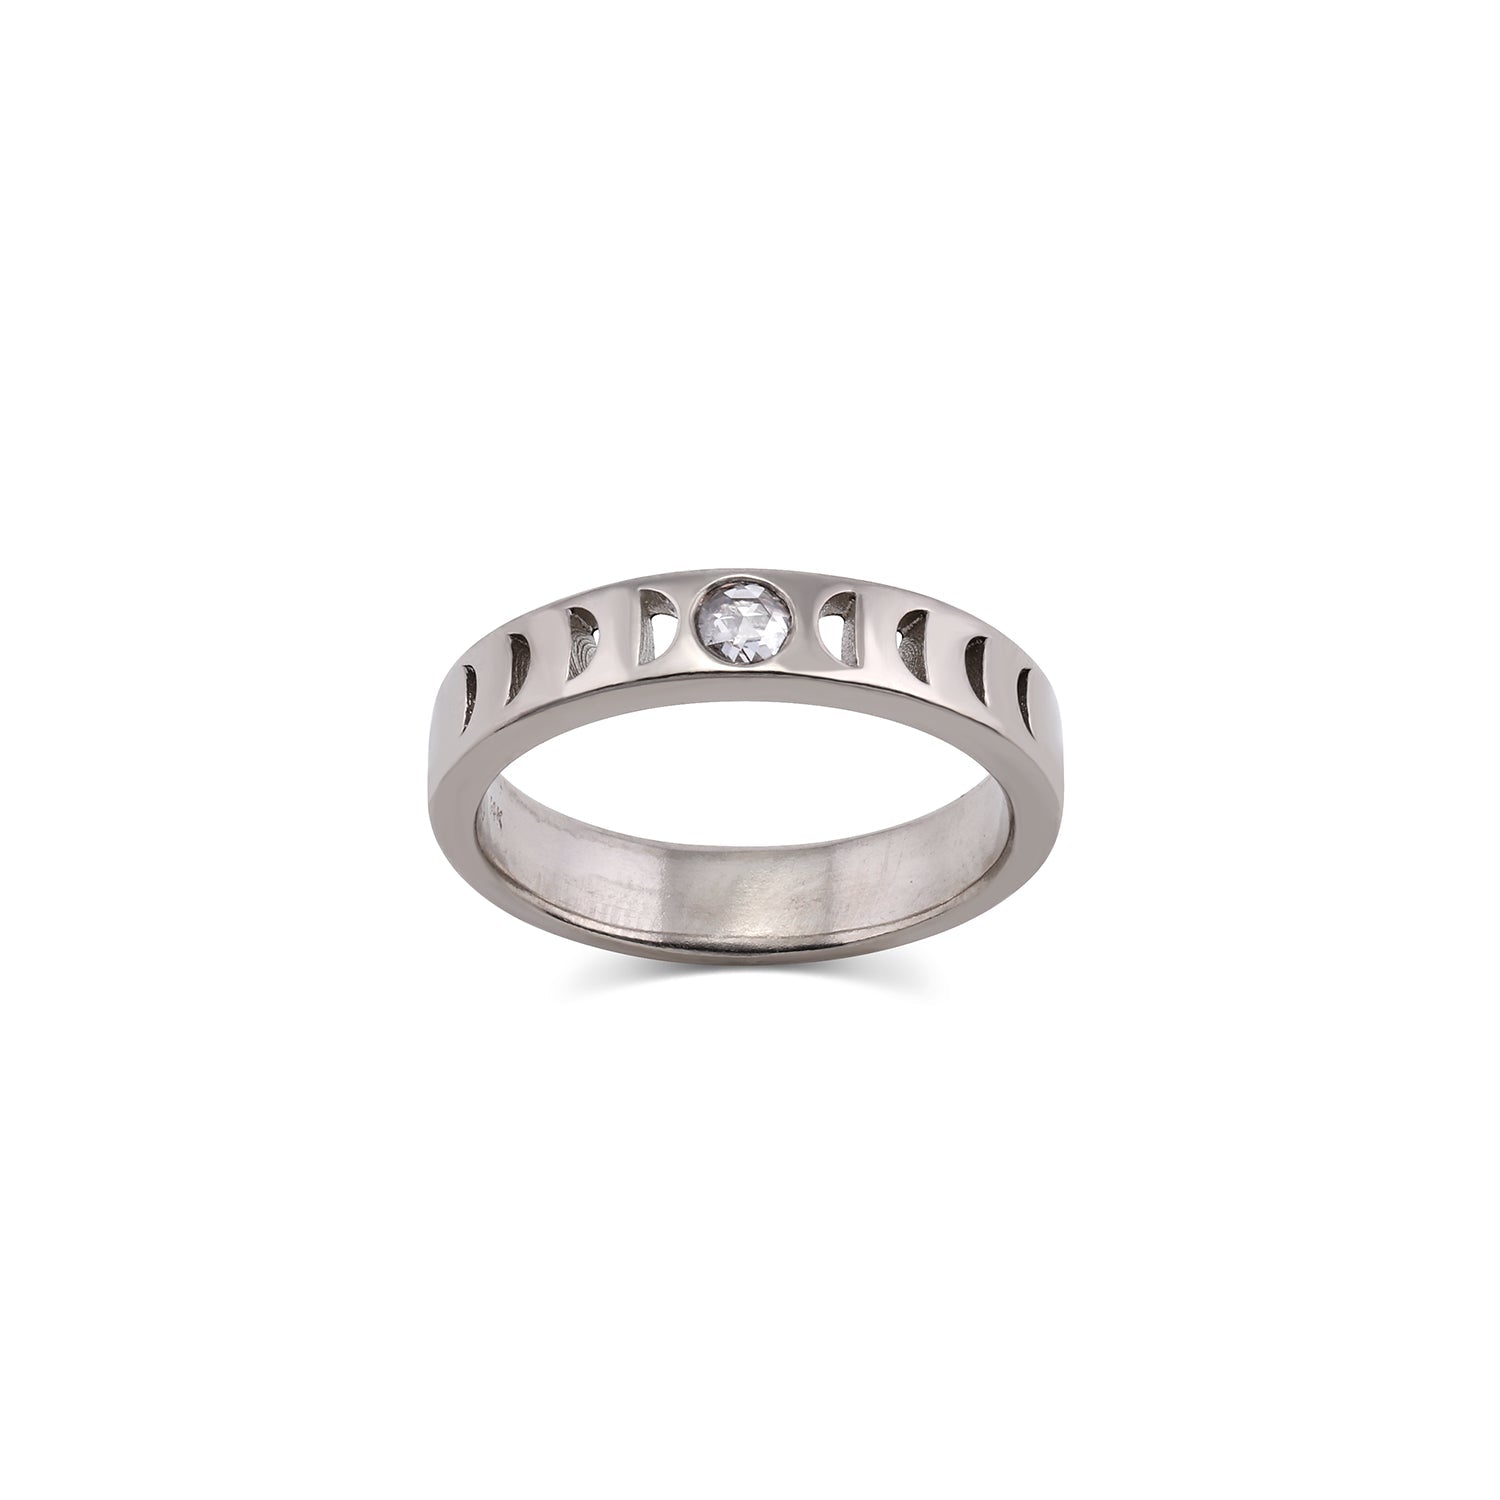 Moon Phase Rings moon phase rings > stacking rings > wedding bands > gender neutral bands > rose cut diamond ring > promise rings >lunar phase ring > moon ring > phases of the moon ring 4.5 / platinum Moon Phase Ring | 4mm wide | precious white